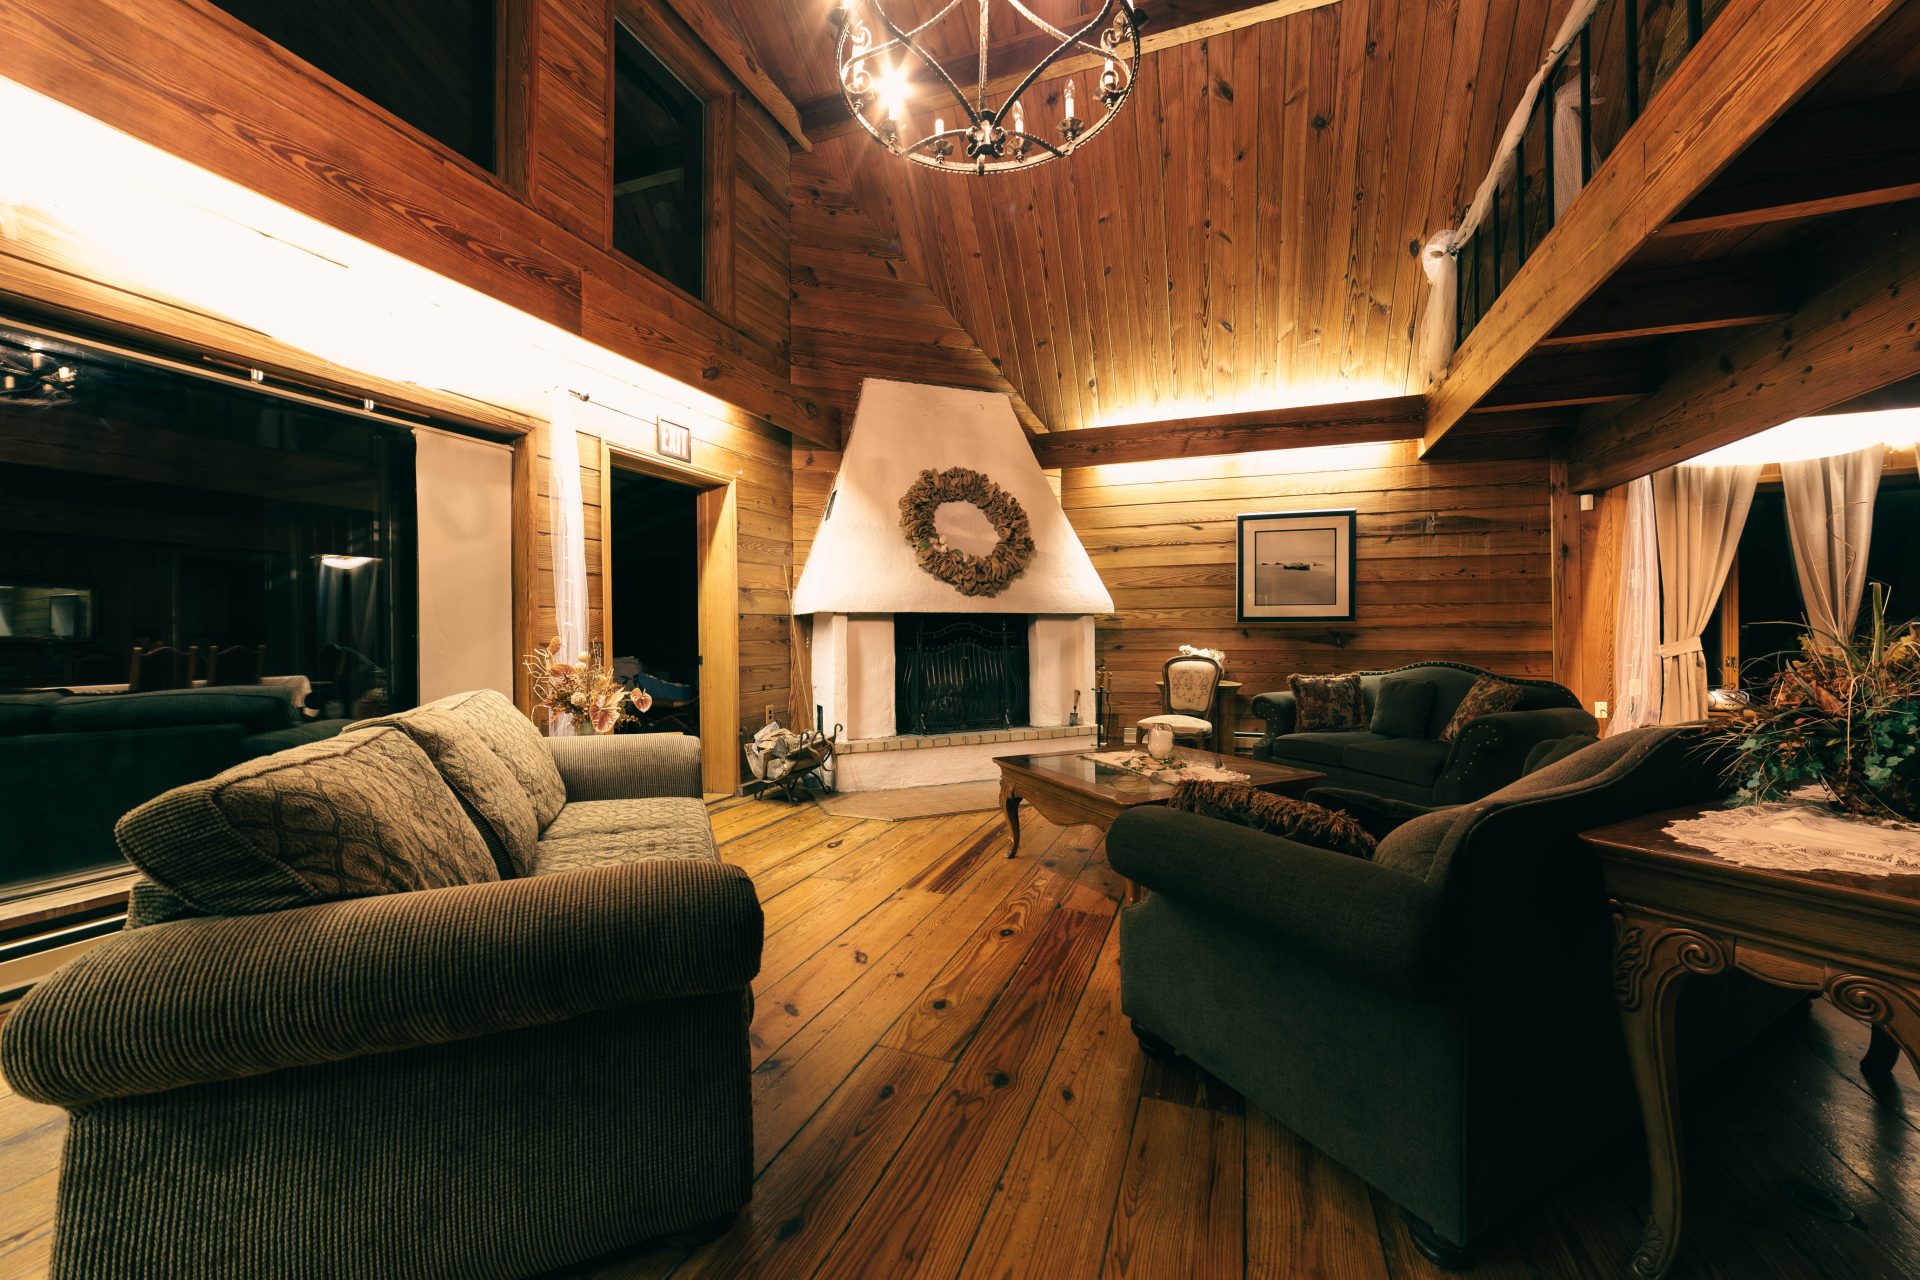 Everything You Need to Know About ChaletStyle Houses